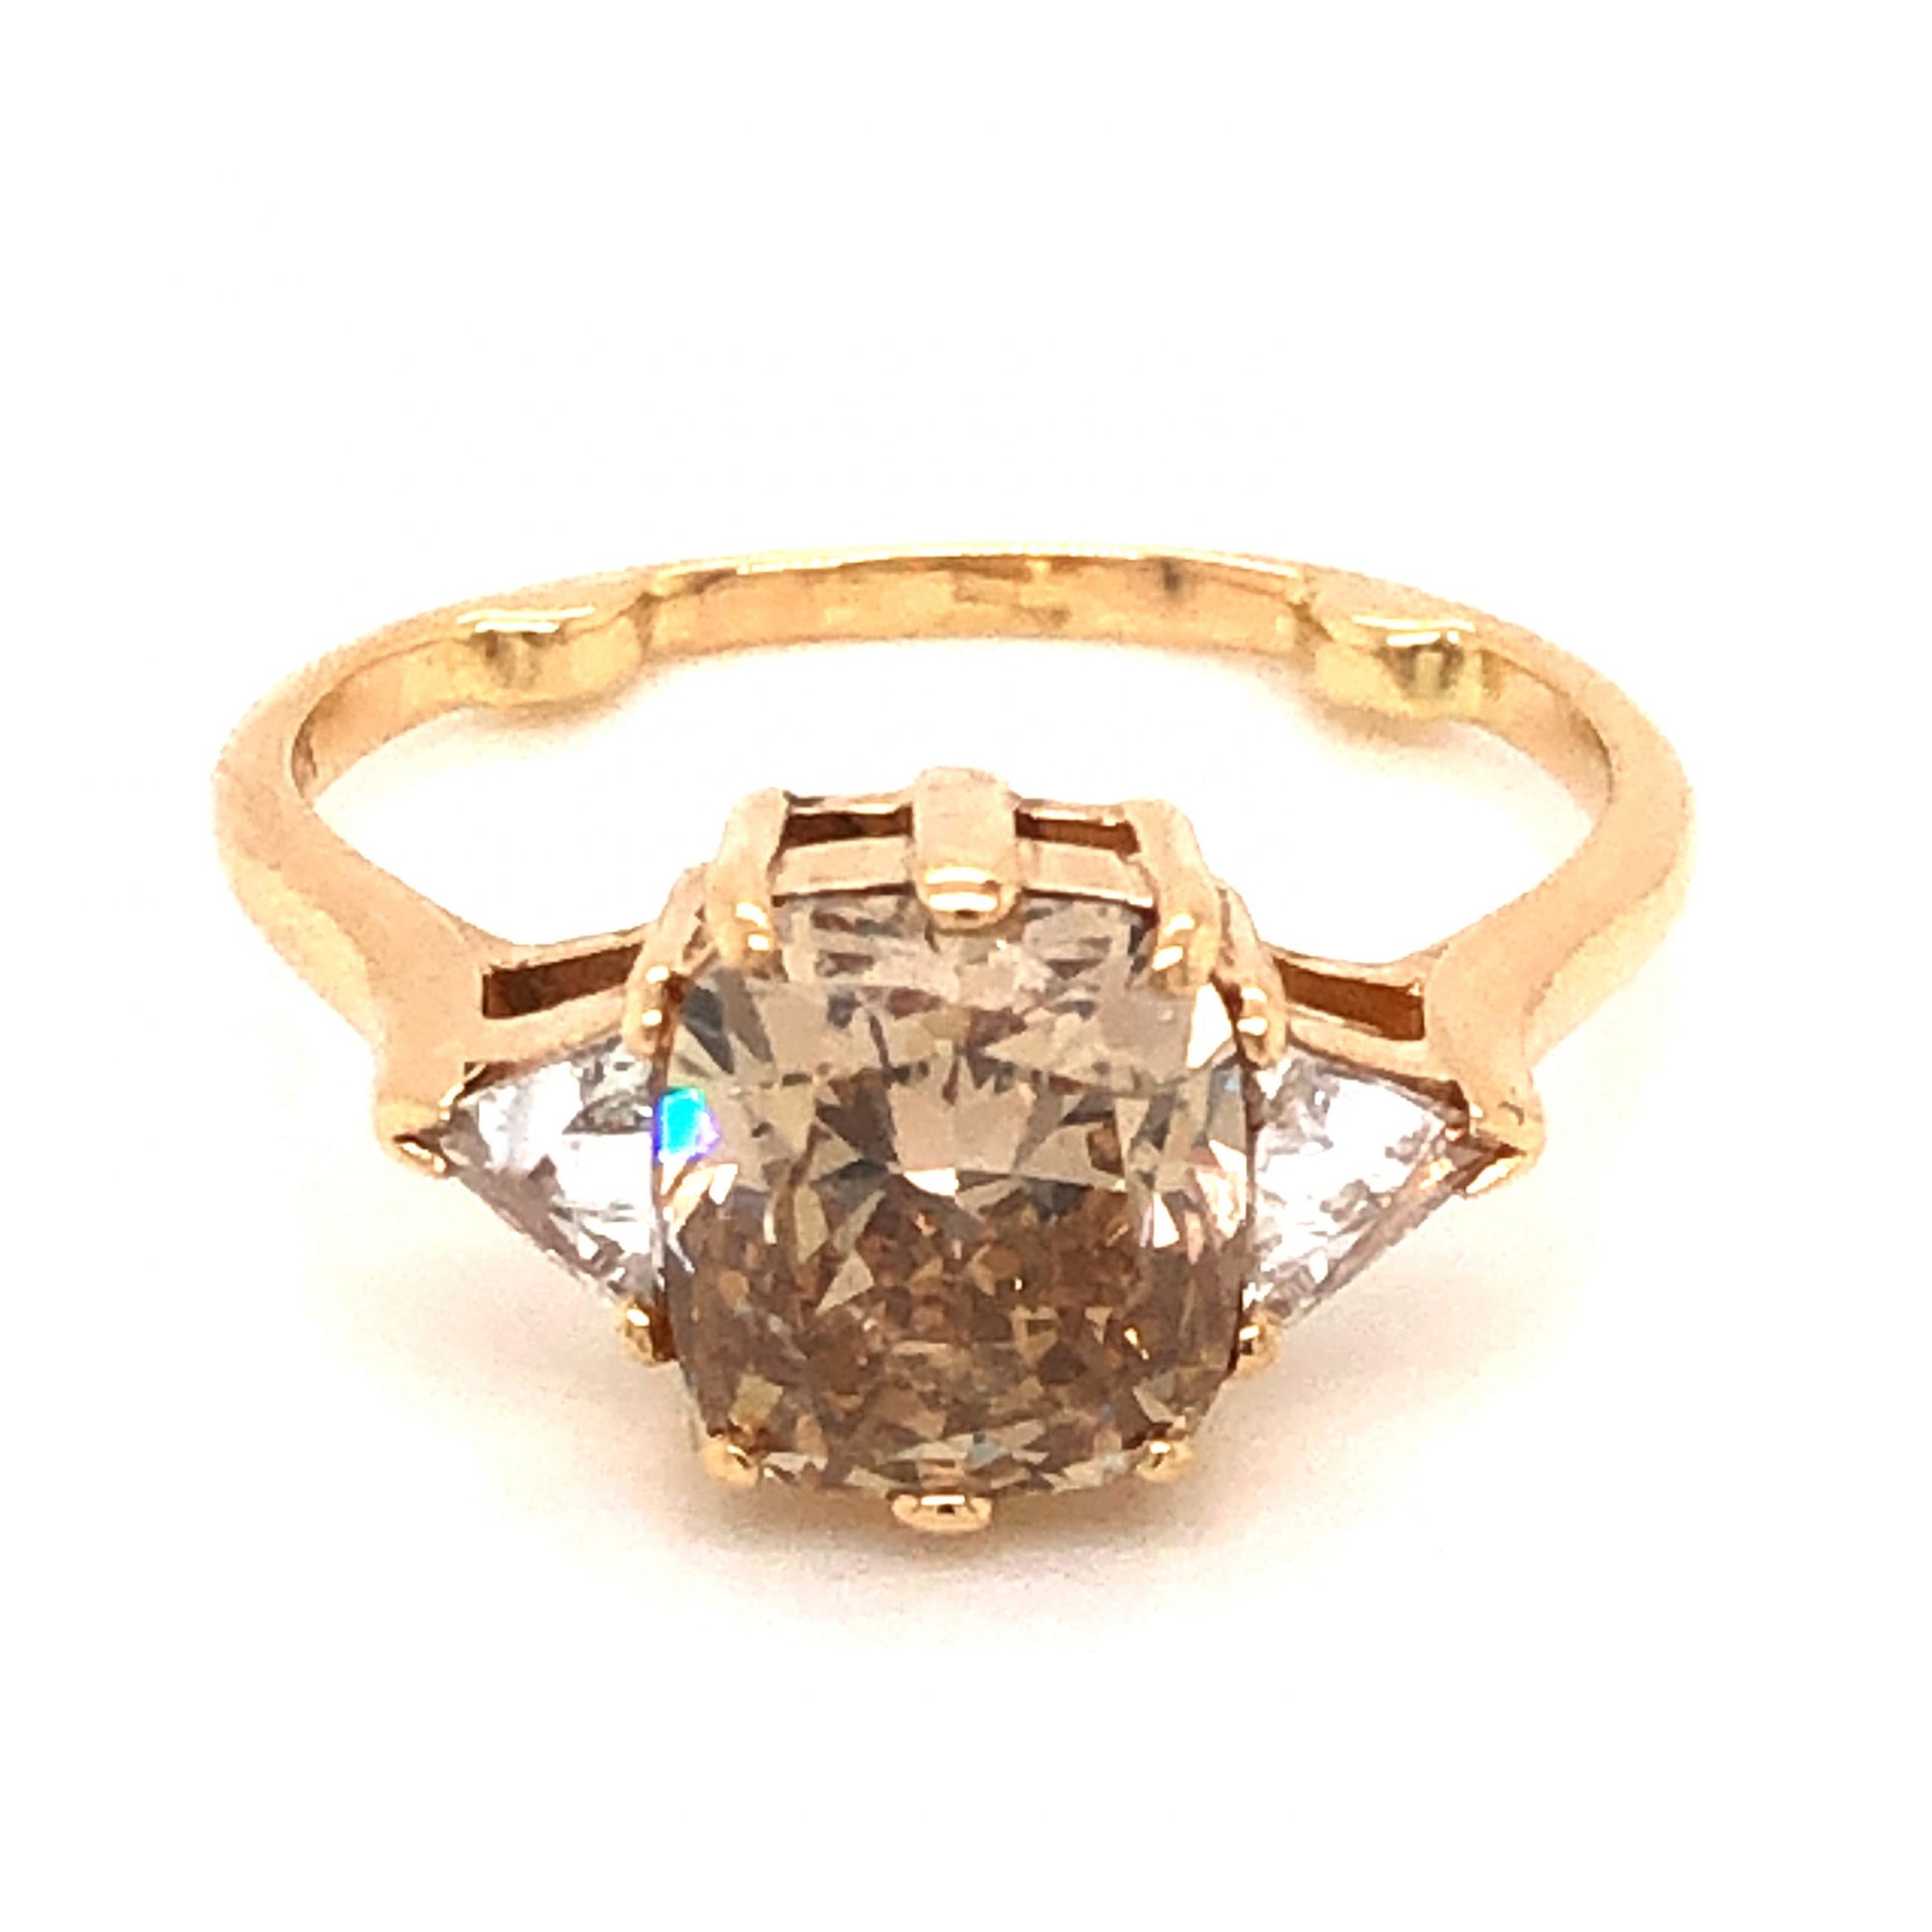 Anna Sheffield Bea Three Stone Engagement Ring in 14k Yellow Gold